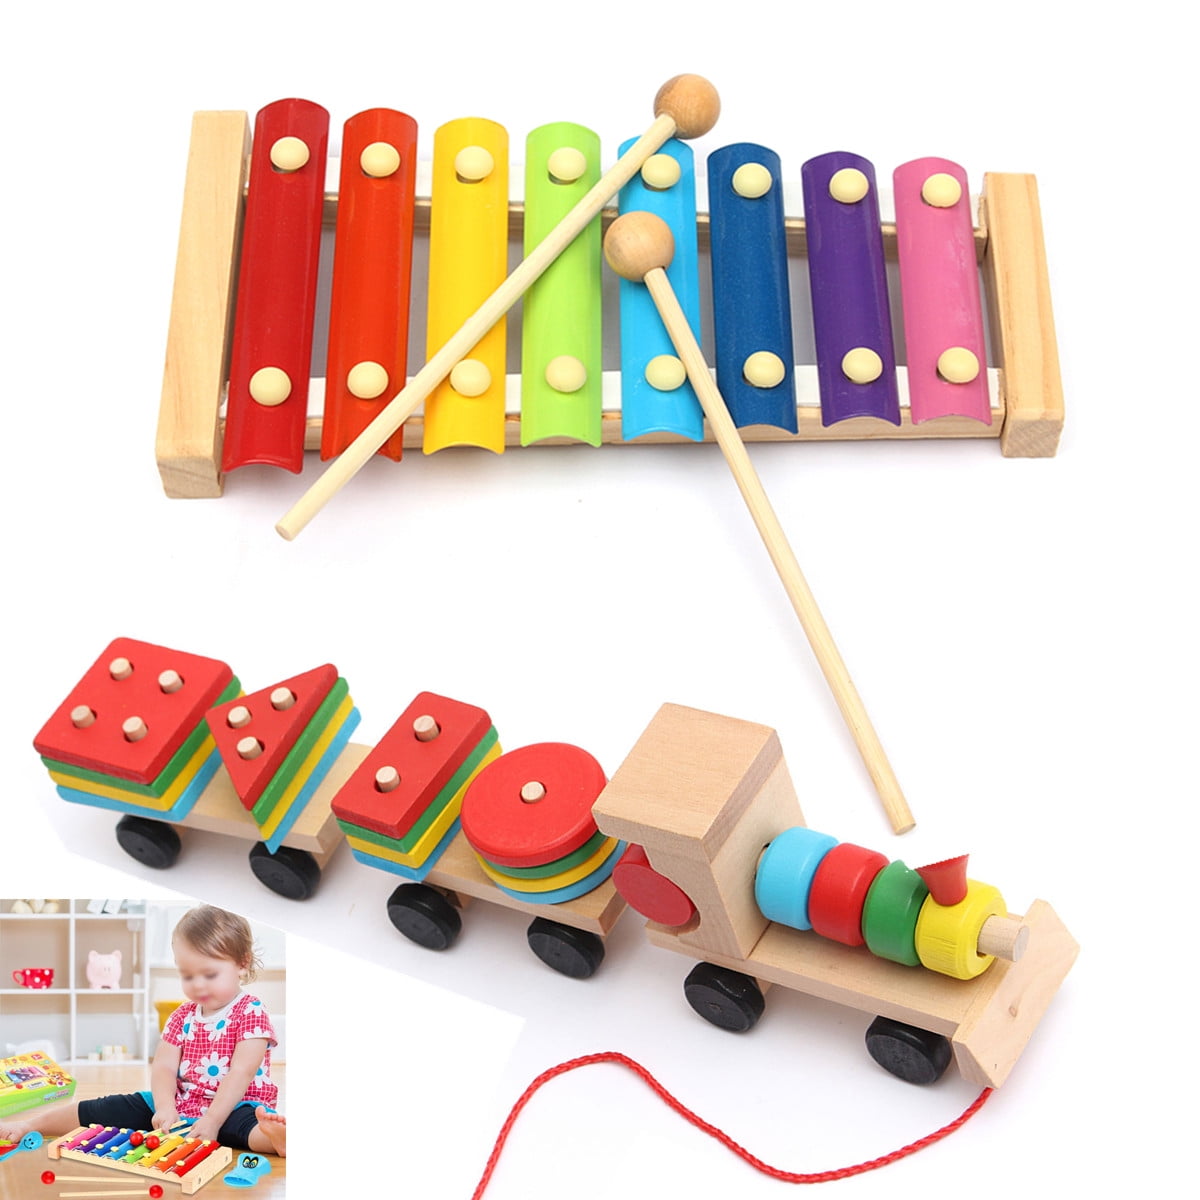 baby toy piano xylophone